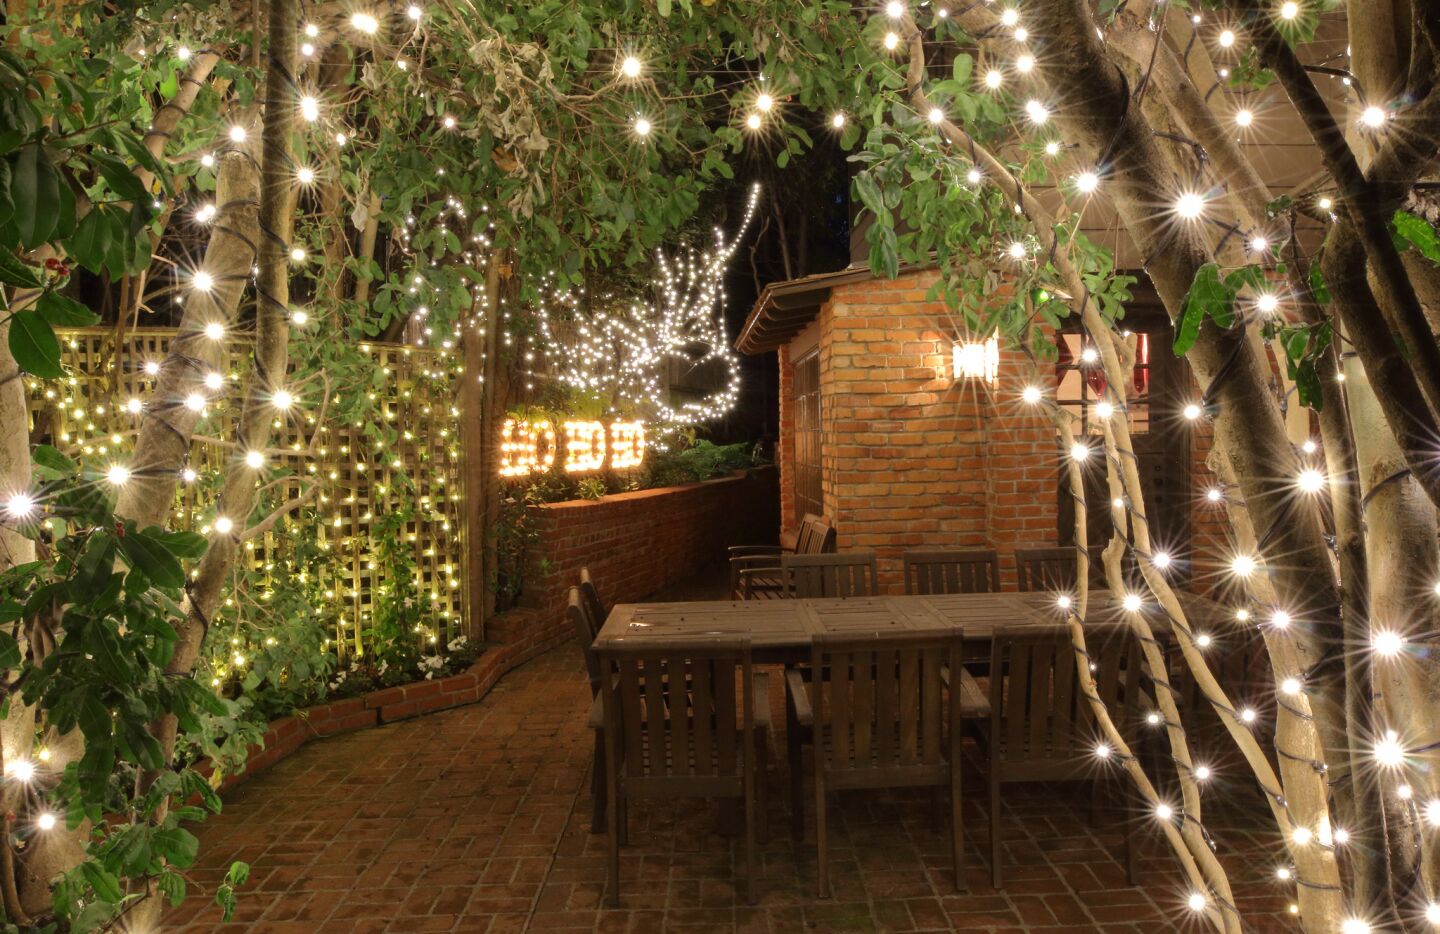 Christmas lights add sparkle to the patio.